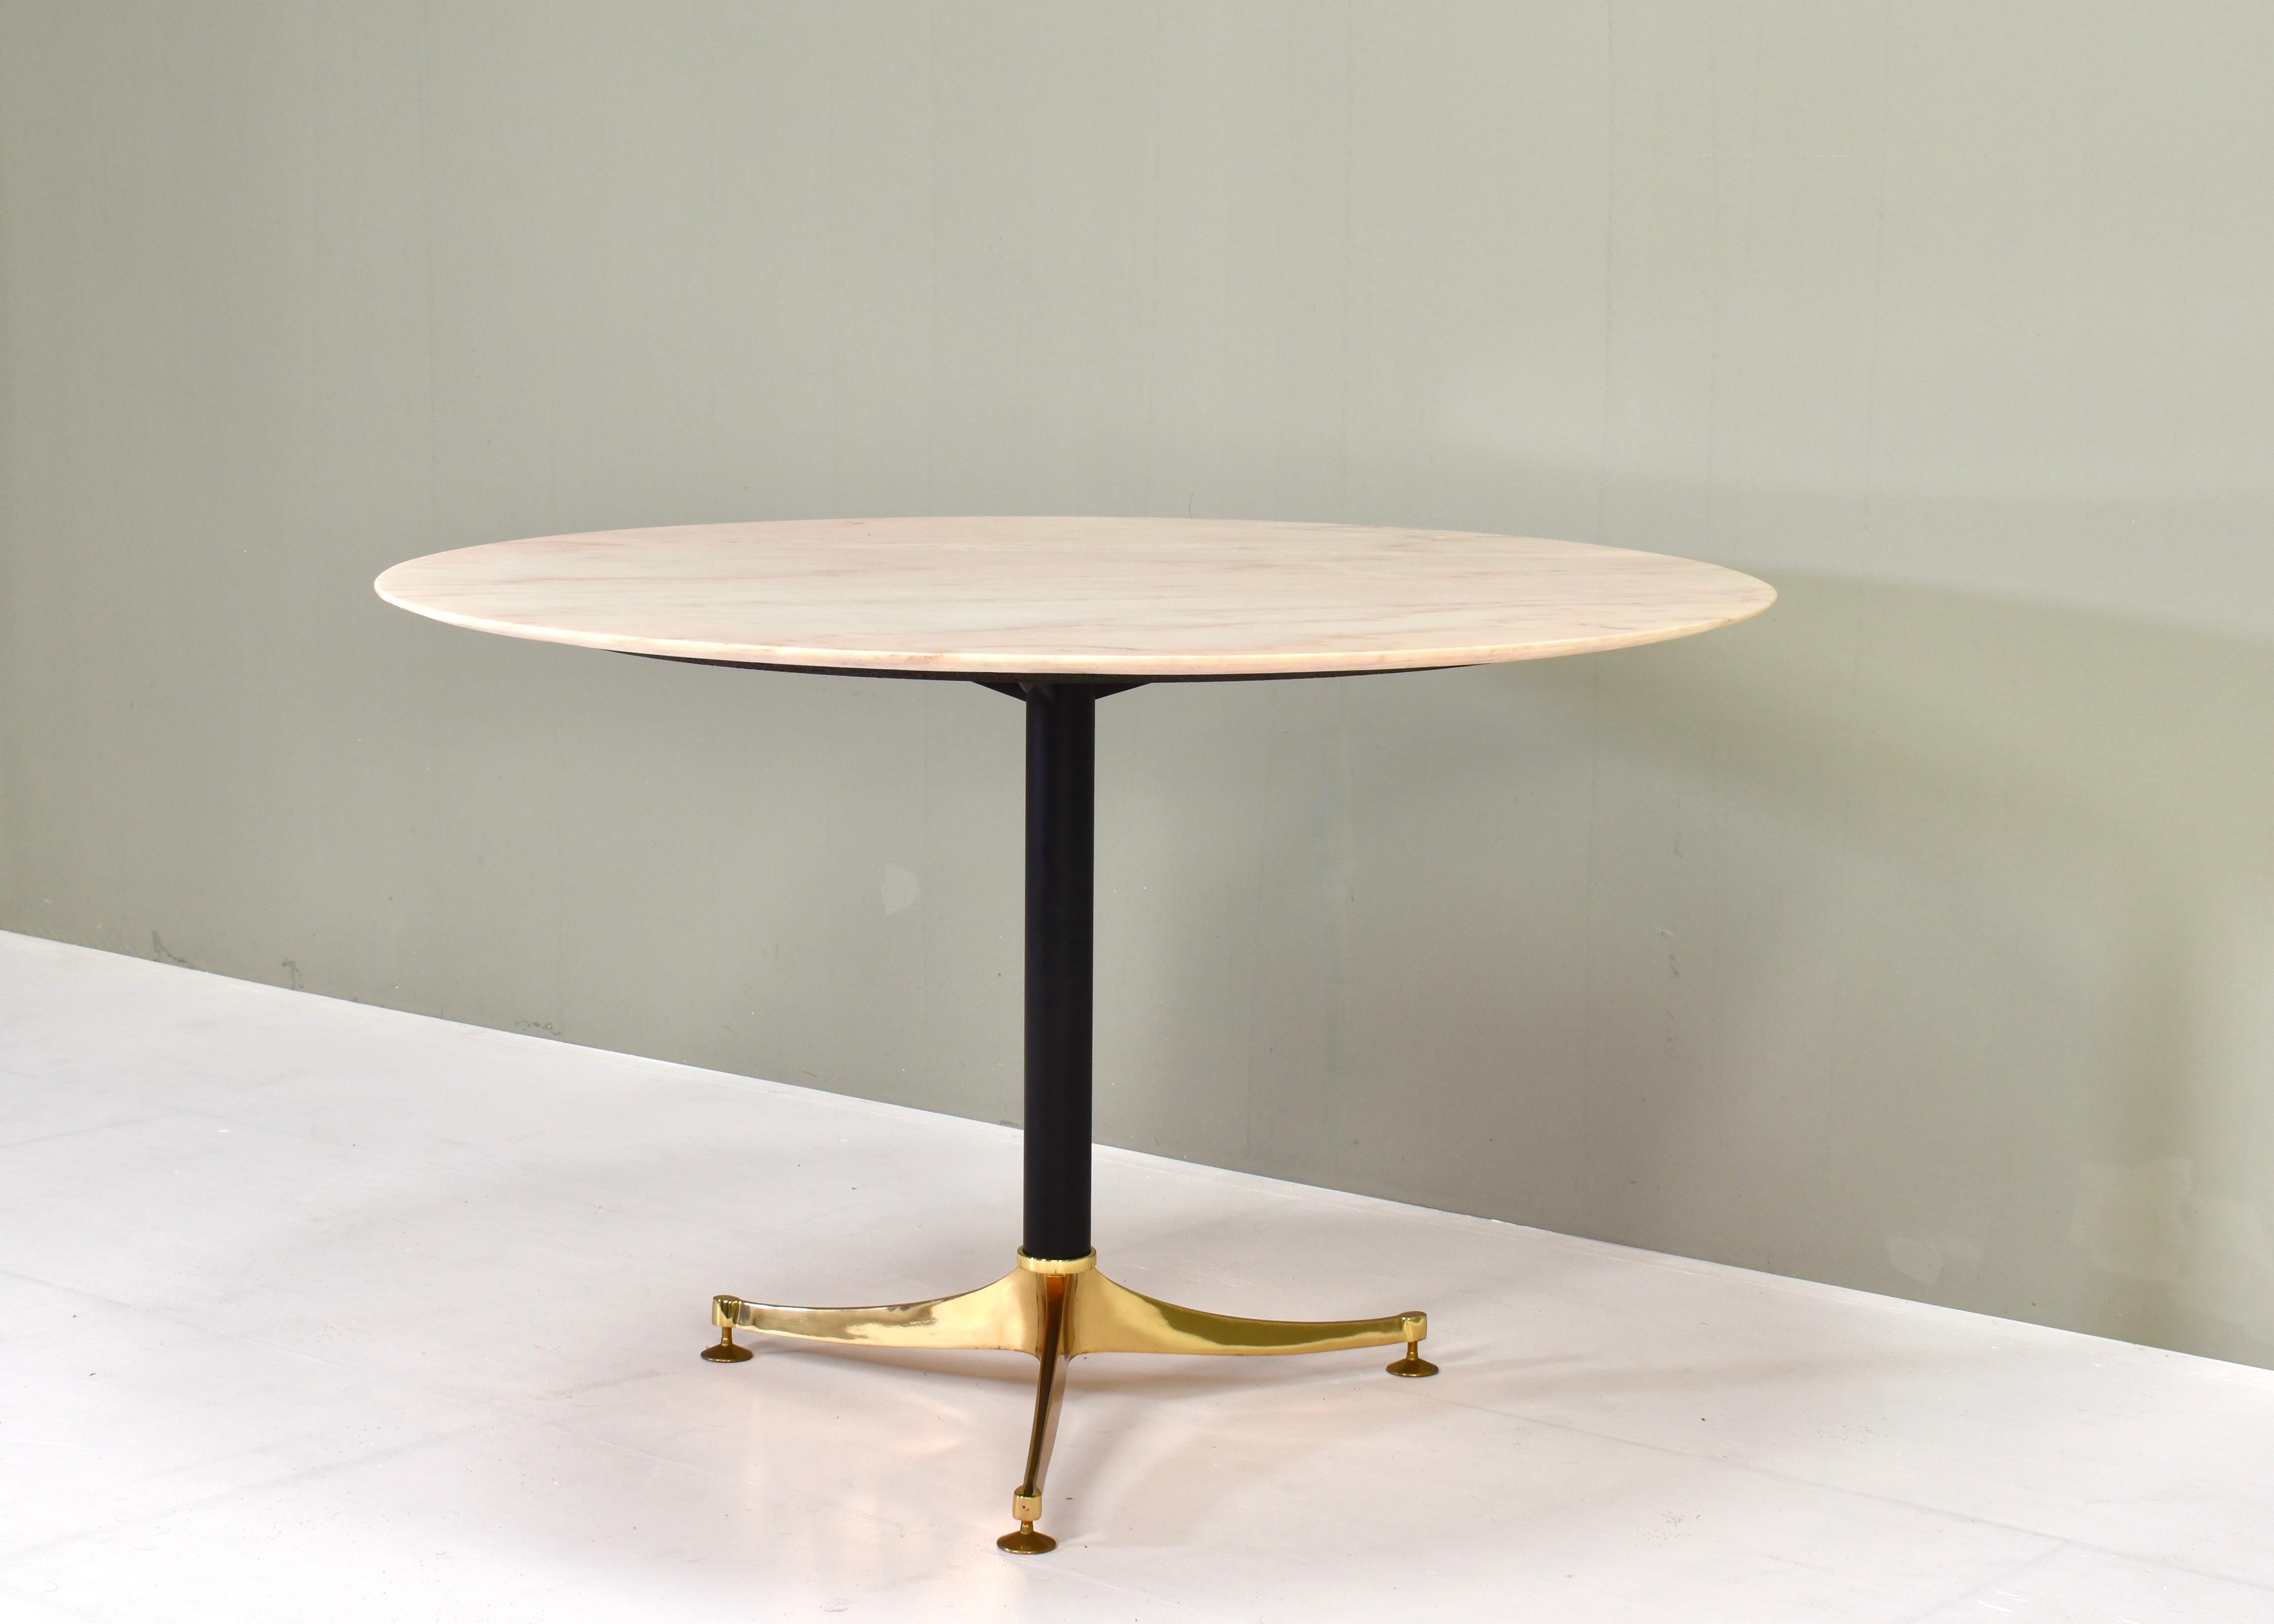 1970's Italian Dining Table in Rosé Marble and Brass - Italy, circa 1970 For Sale 3